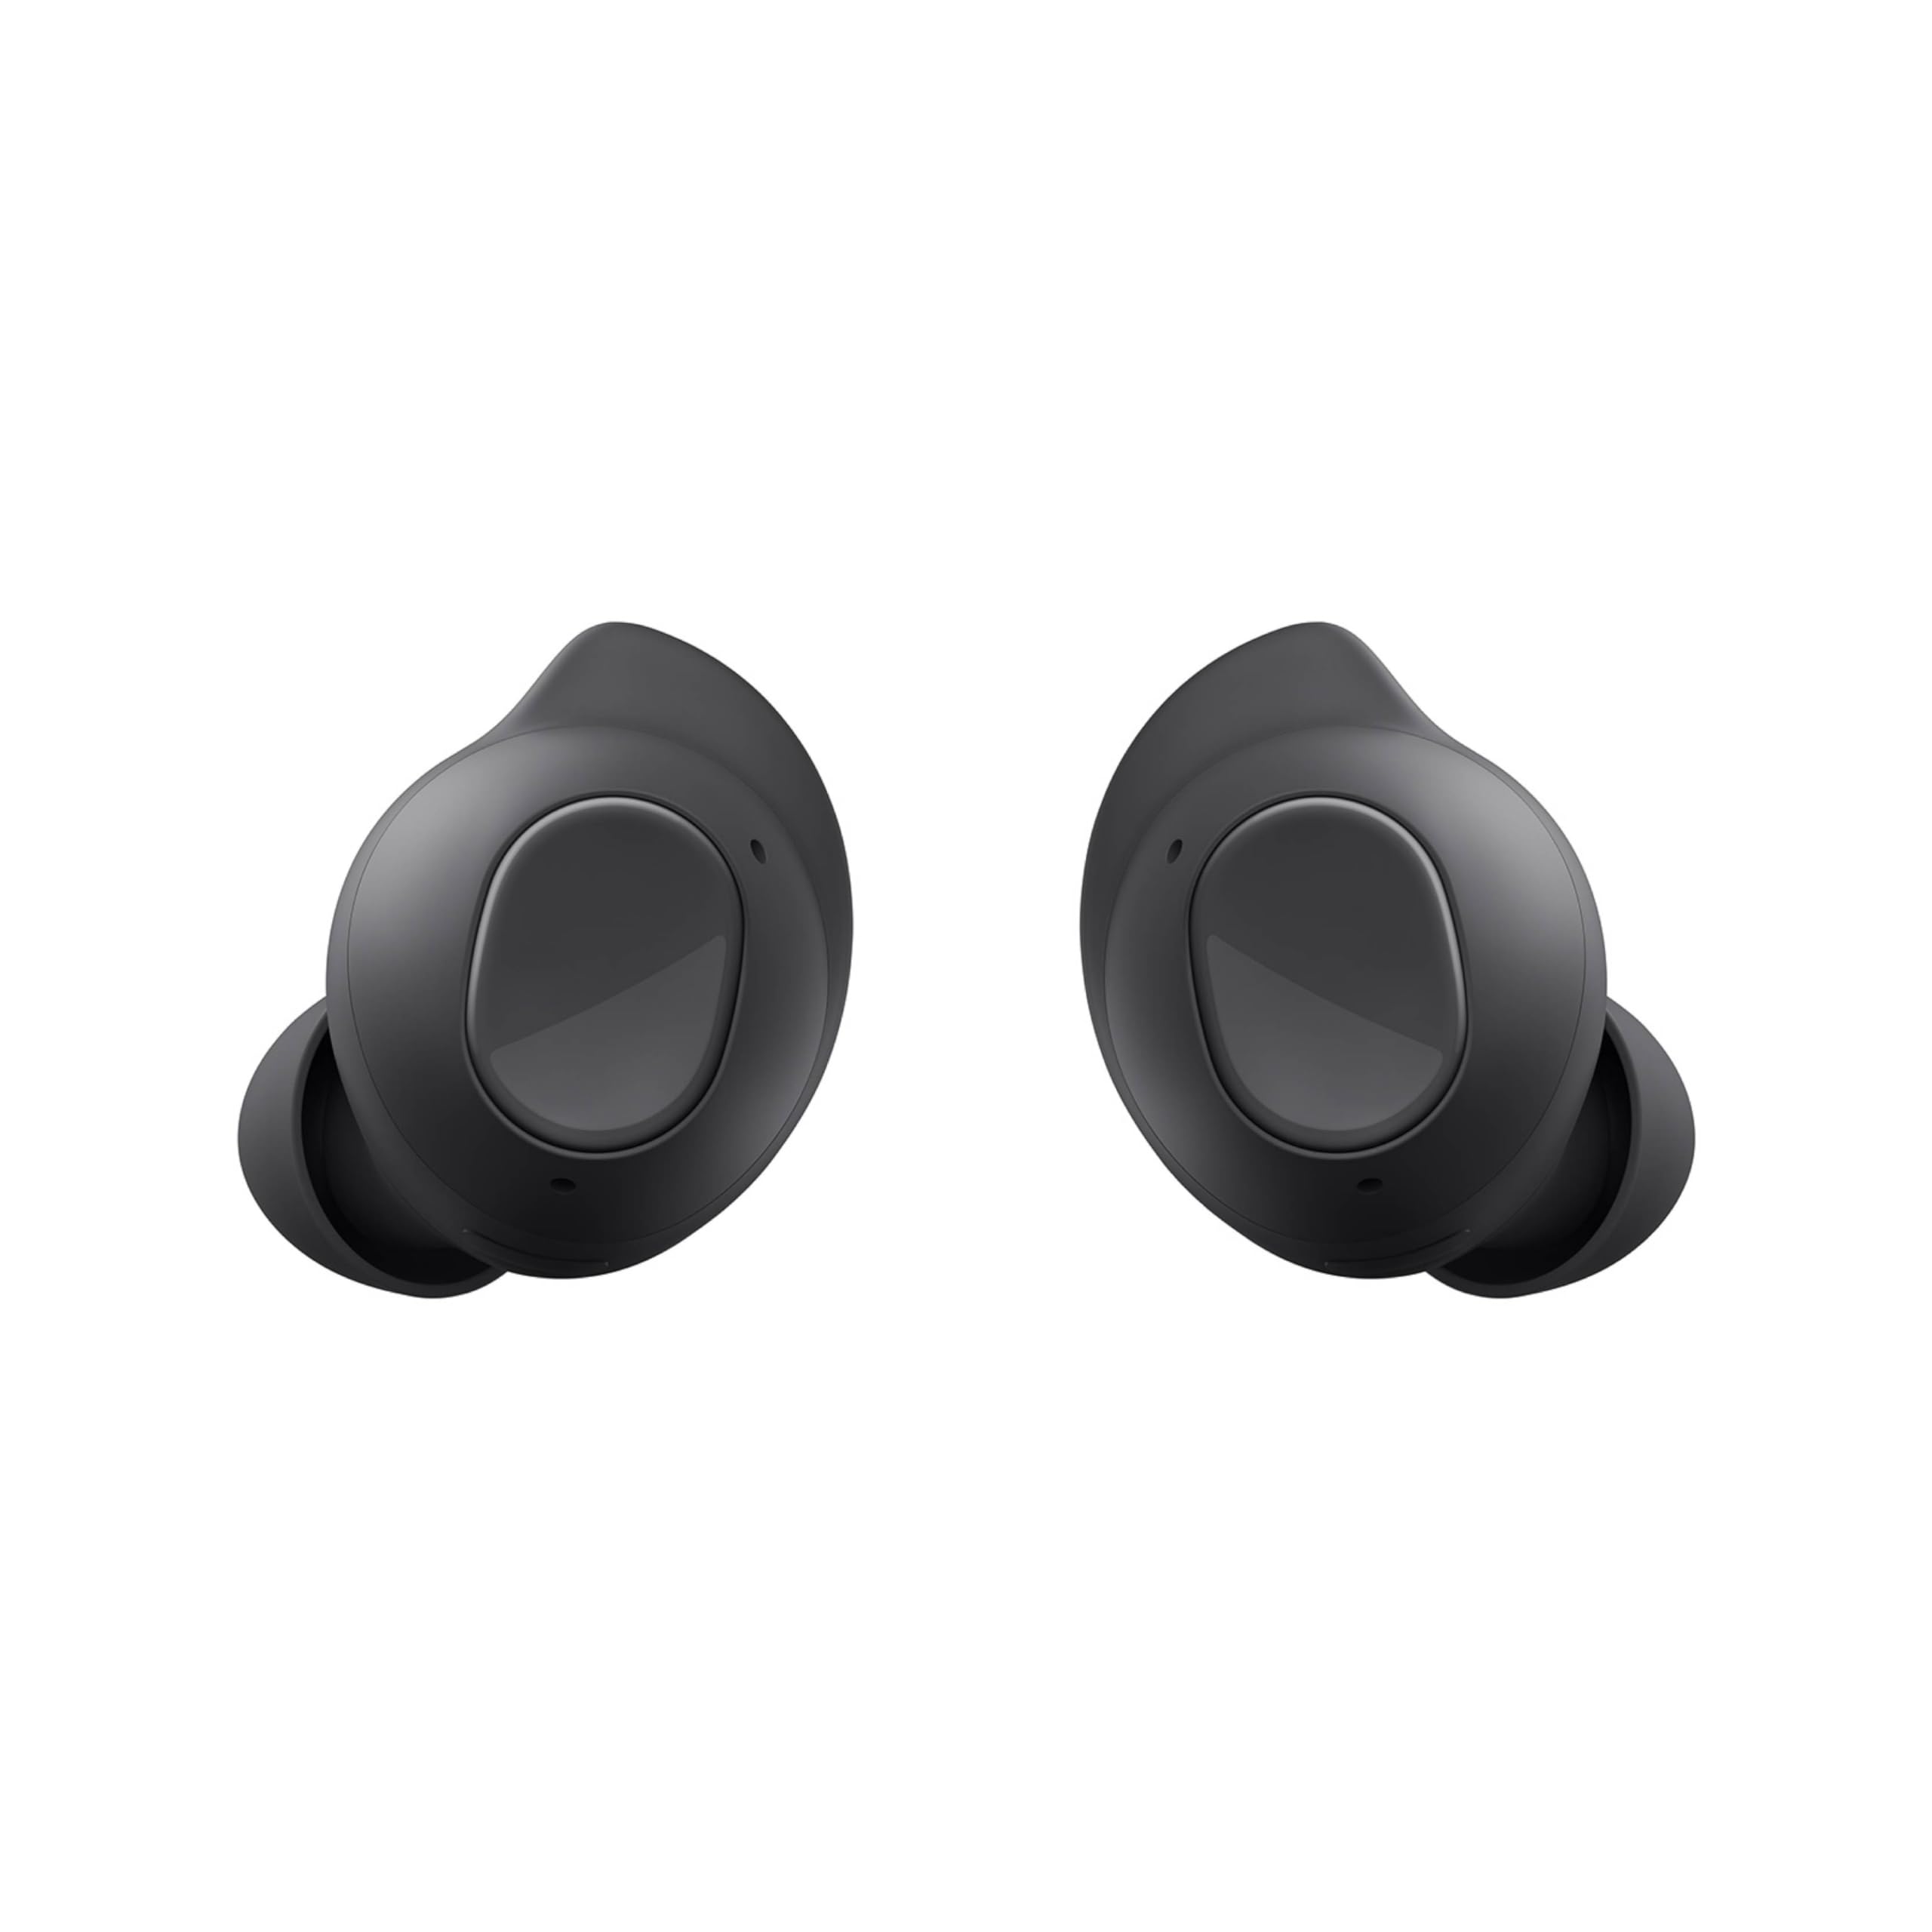 SAMSUNG Galaxy Buds FE, Comfort and Secure Fit, Wing-Tip Design, ANC Support, Ecosystem Connectivity, True Wireless Bluetooth Earbuds, Powerful 1-Way Speaker, US Version, SM-R400NZAAXAR, Graphite